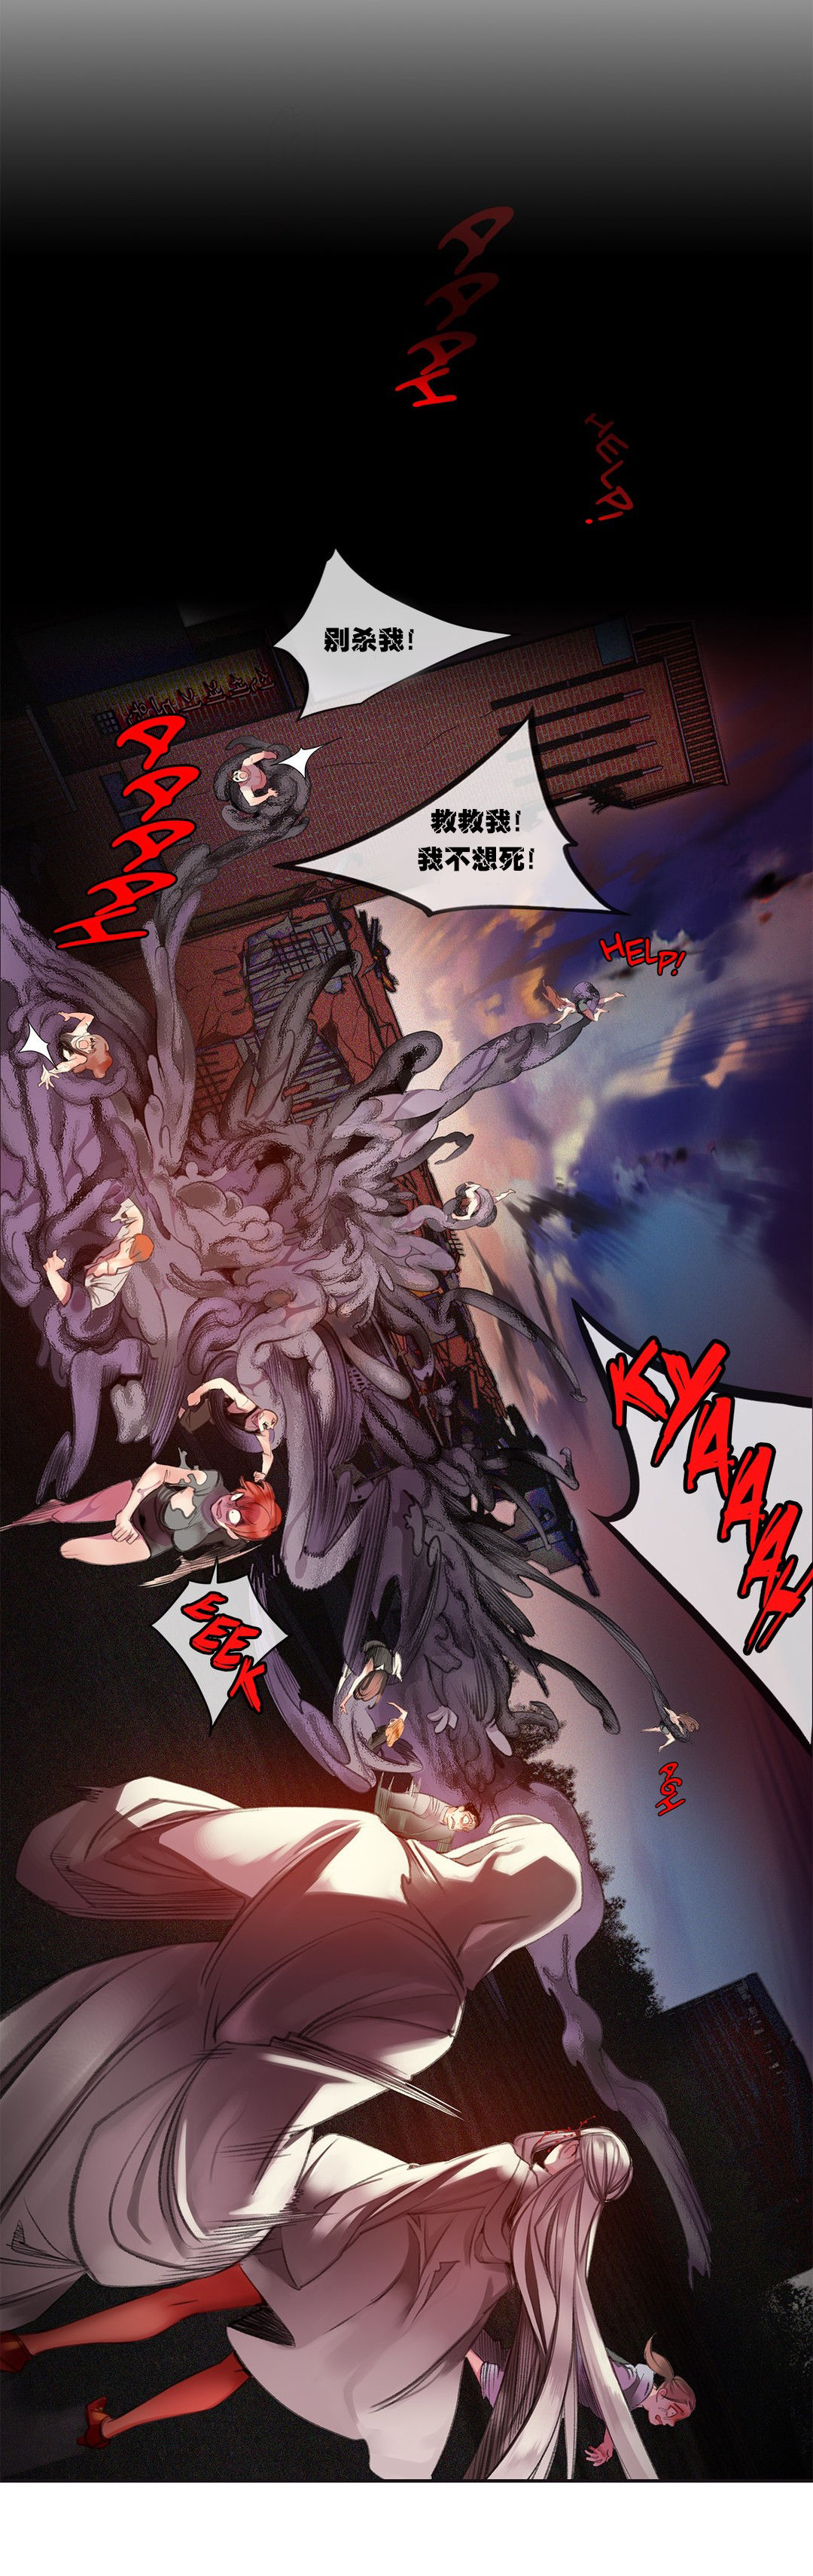 [Juder] Lilith`s Cord (第二季) Ch.61-63 [Chinese] [aaatwist个人汉化] [Ongoing] 